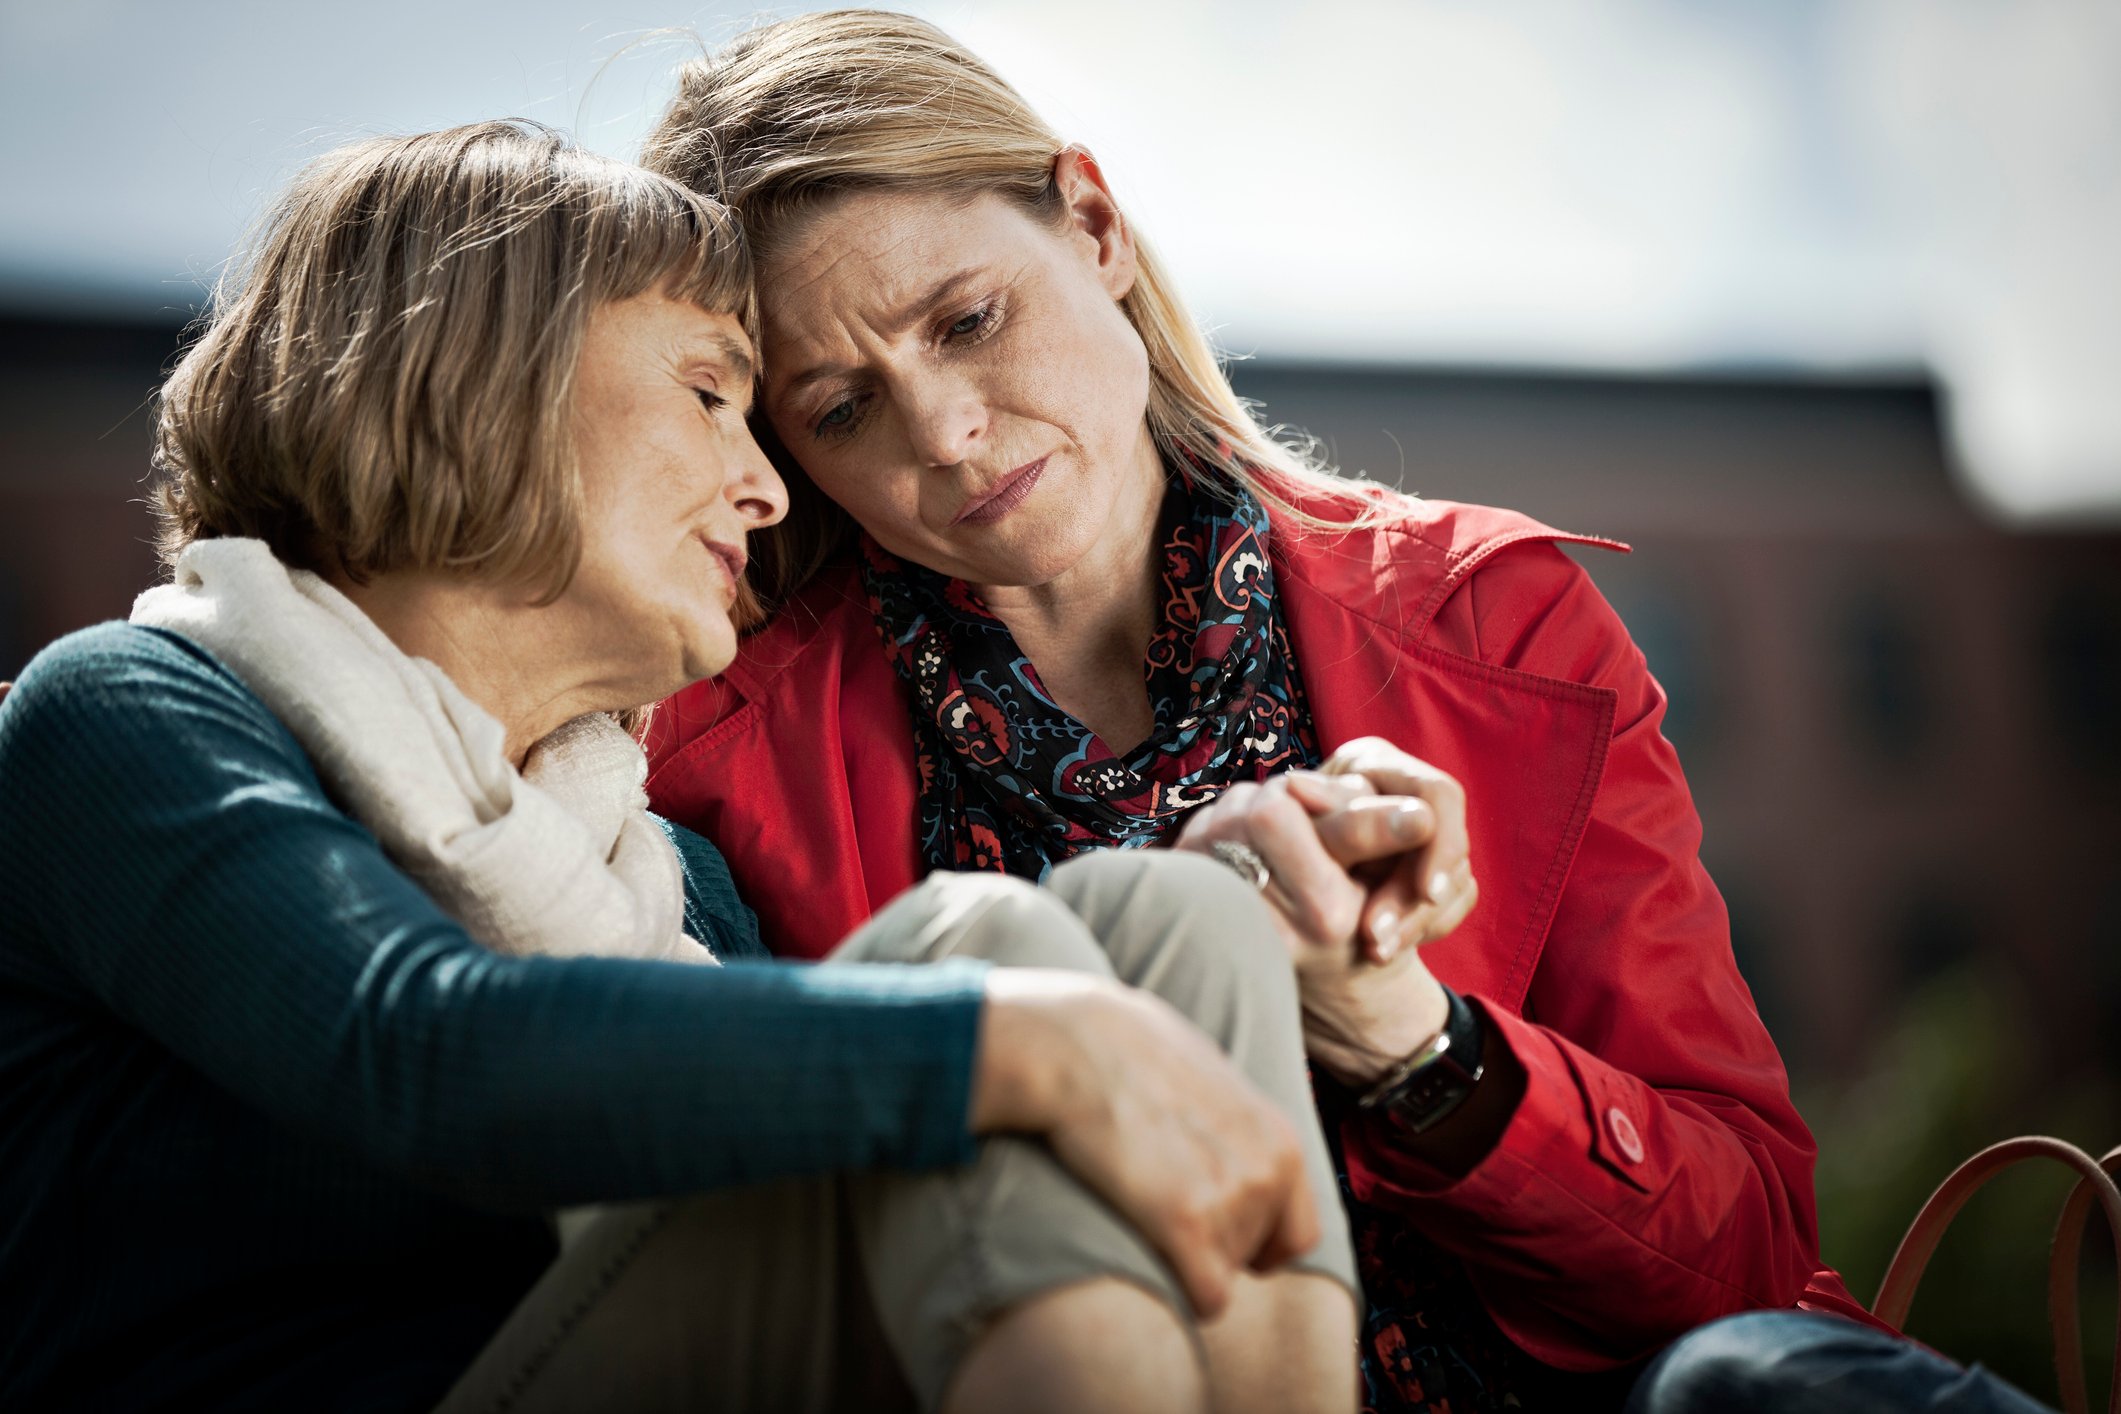 Slideshow: 5 Most Unexpected Challenges of Caregiving